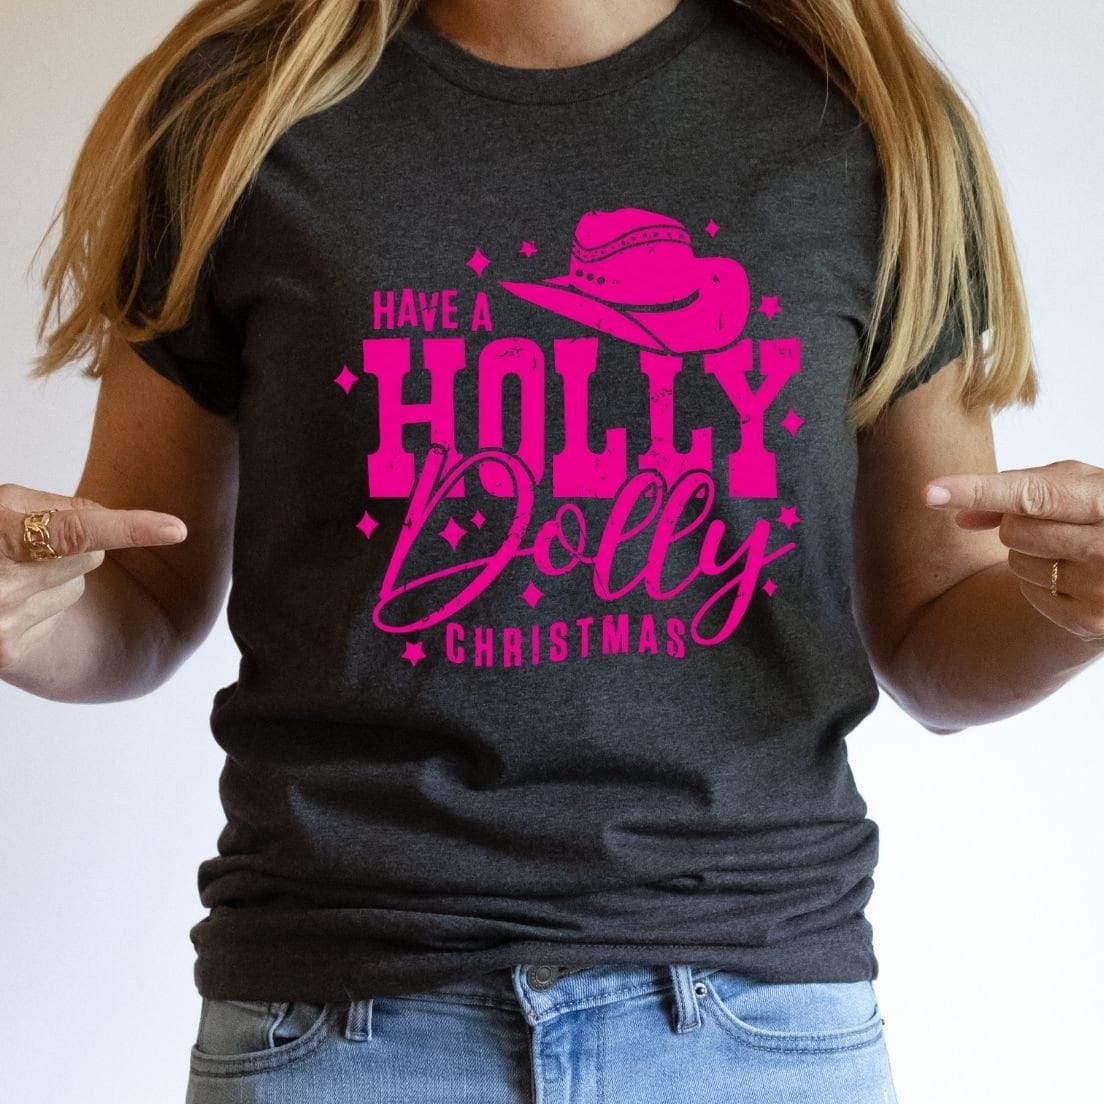 Have A Holly Dolly Christmas Shirt, Vintage Christmas Shirt, Funny Christmas Shirt, Dolly Parton Shirt, Holly Dolly Christmas Tee